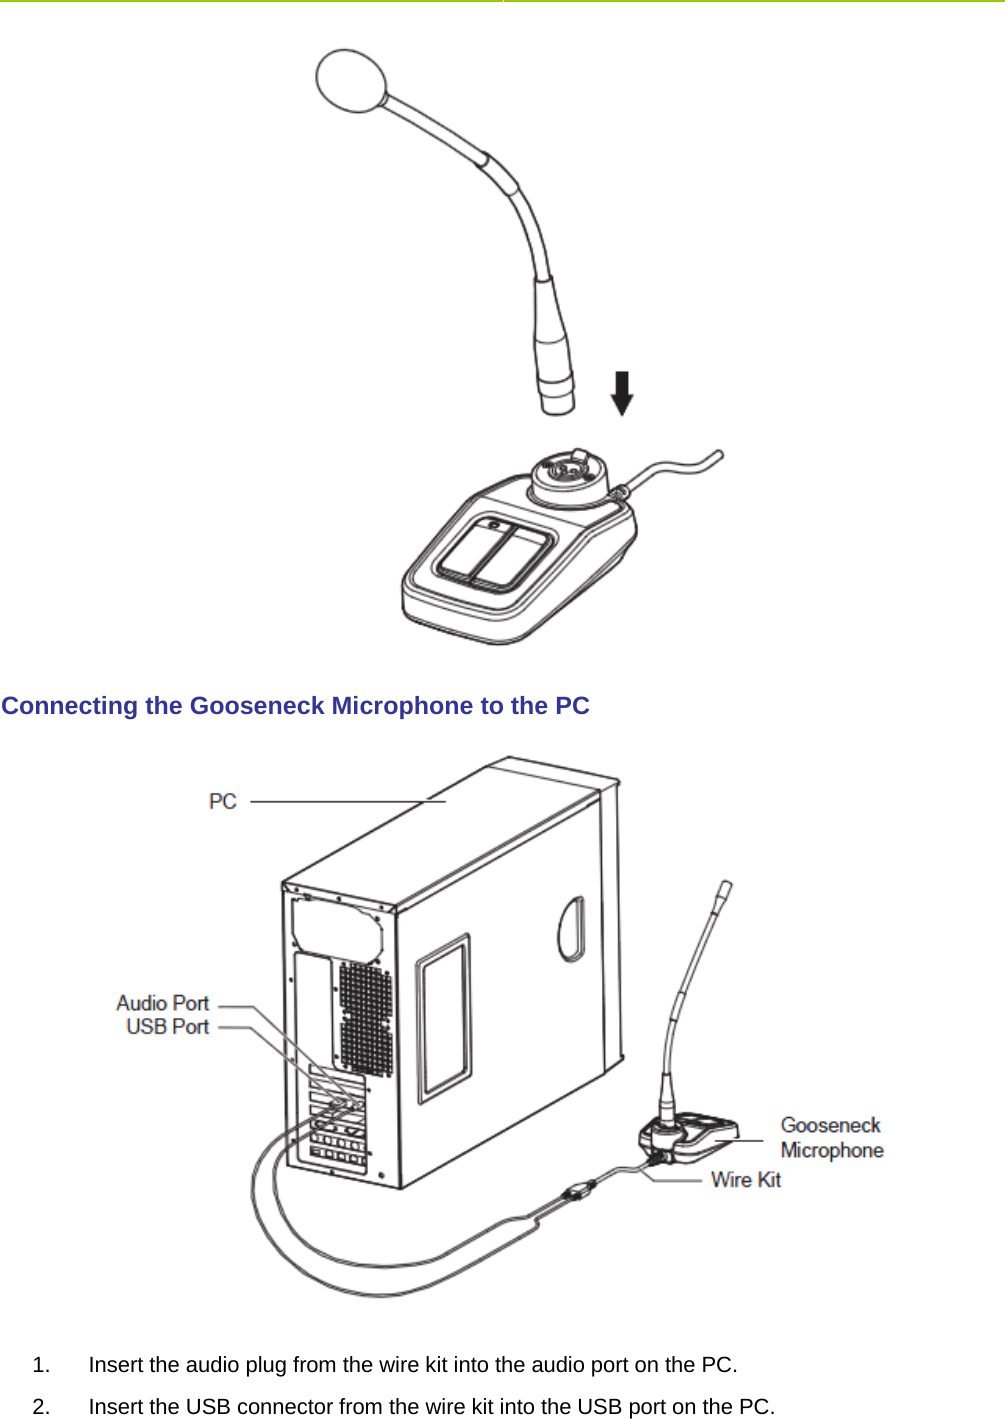     Connecting the Gooseneck Microphone to the PC    1. Insert the audio plug from the wire kit into the audio port on the PC.   2. Insert the USB connector from the wire kit into the USB port on the PC.   